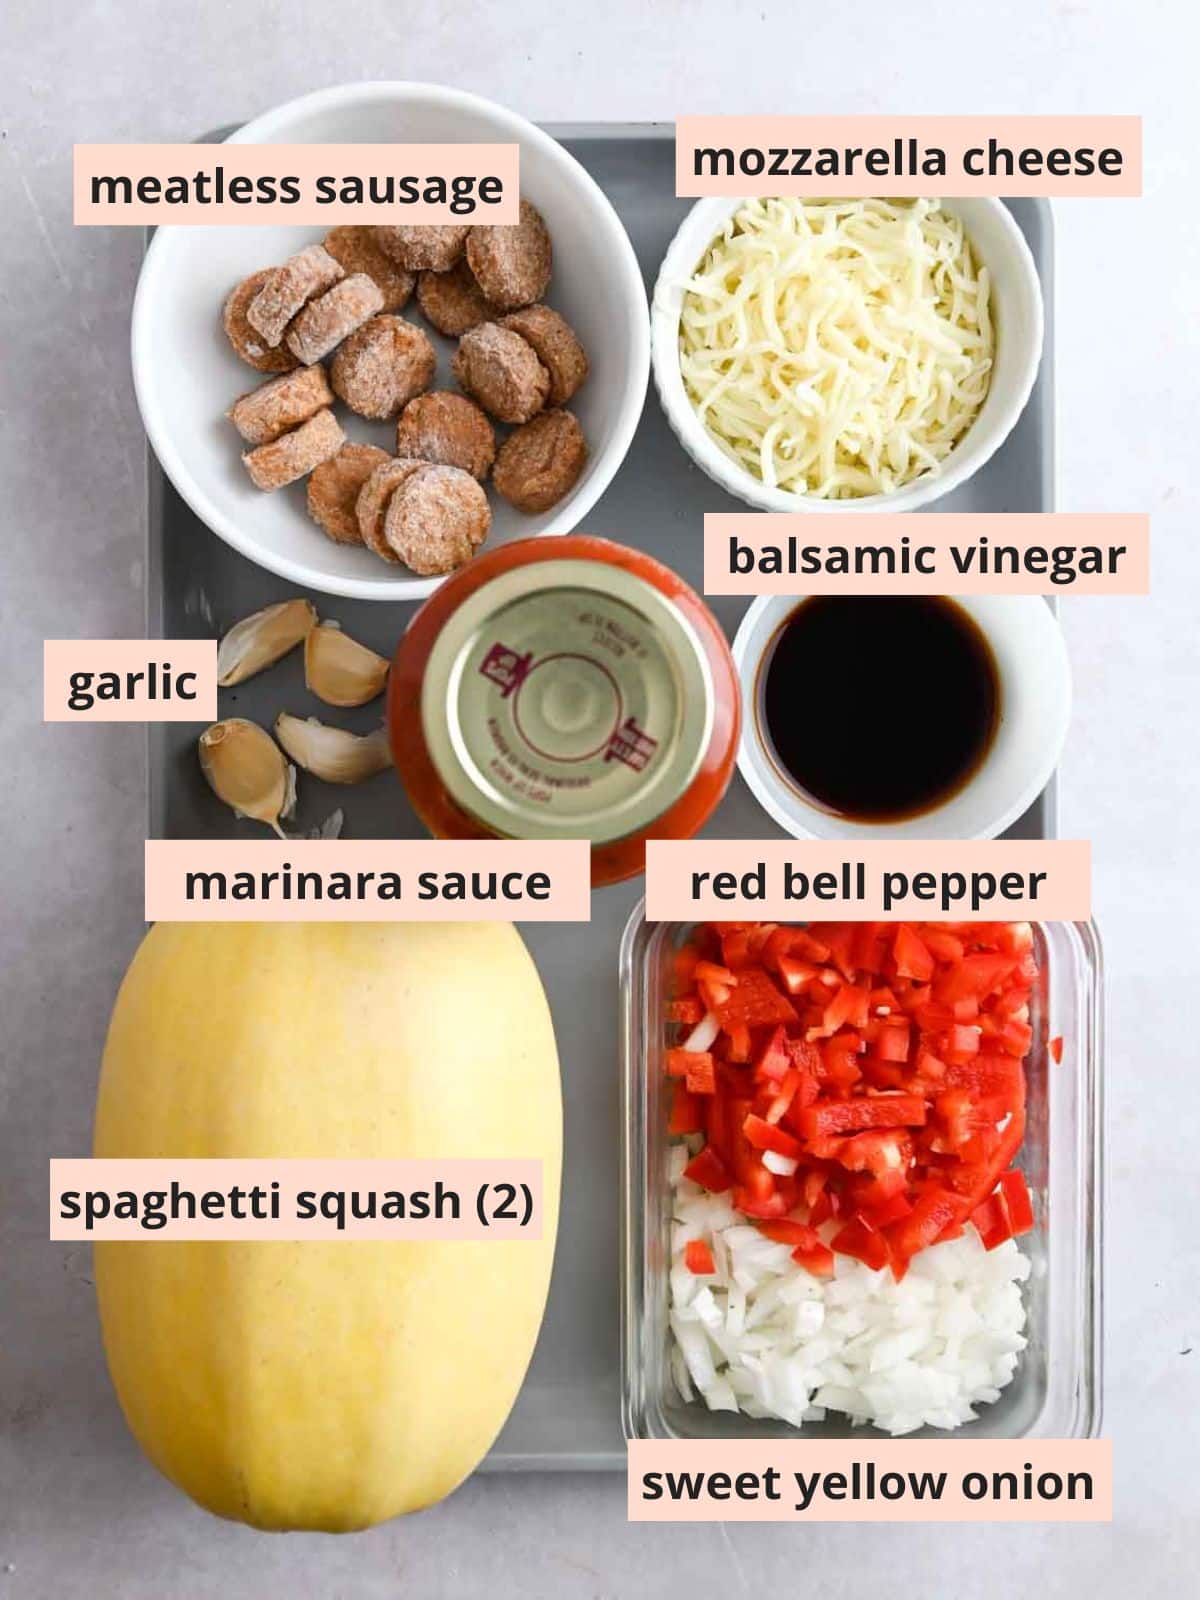 Labeled ingredients used to make spaghetti squash.